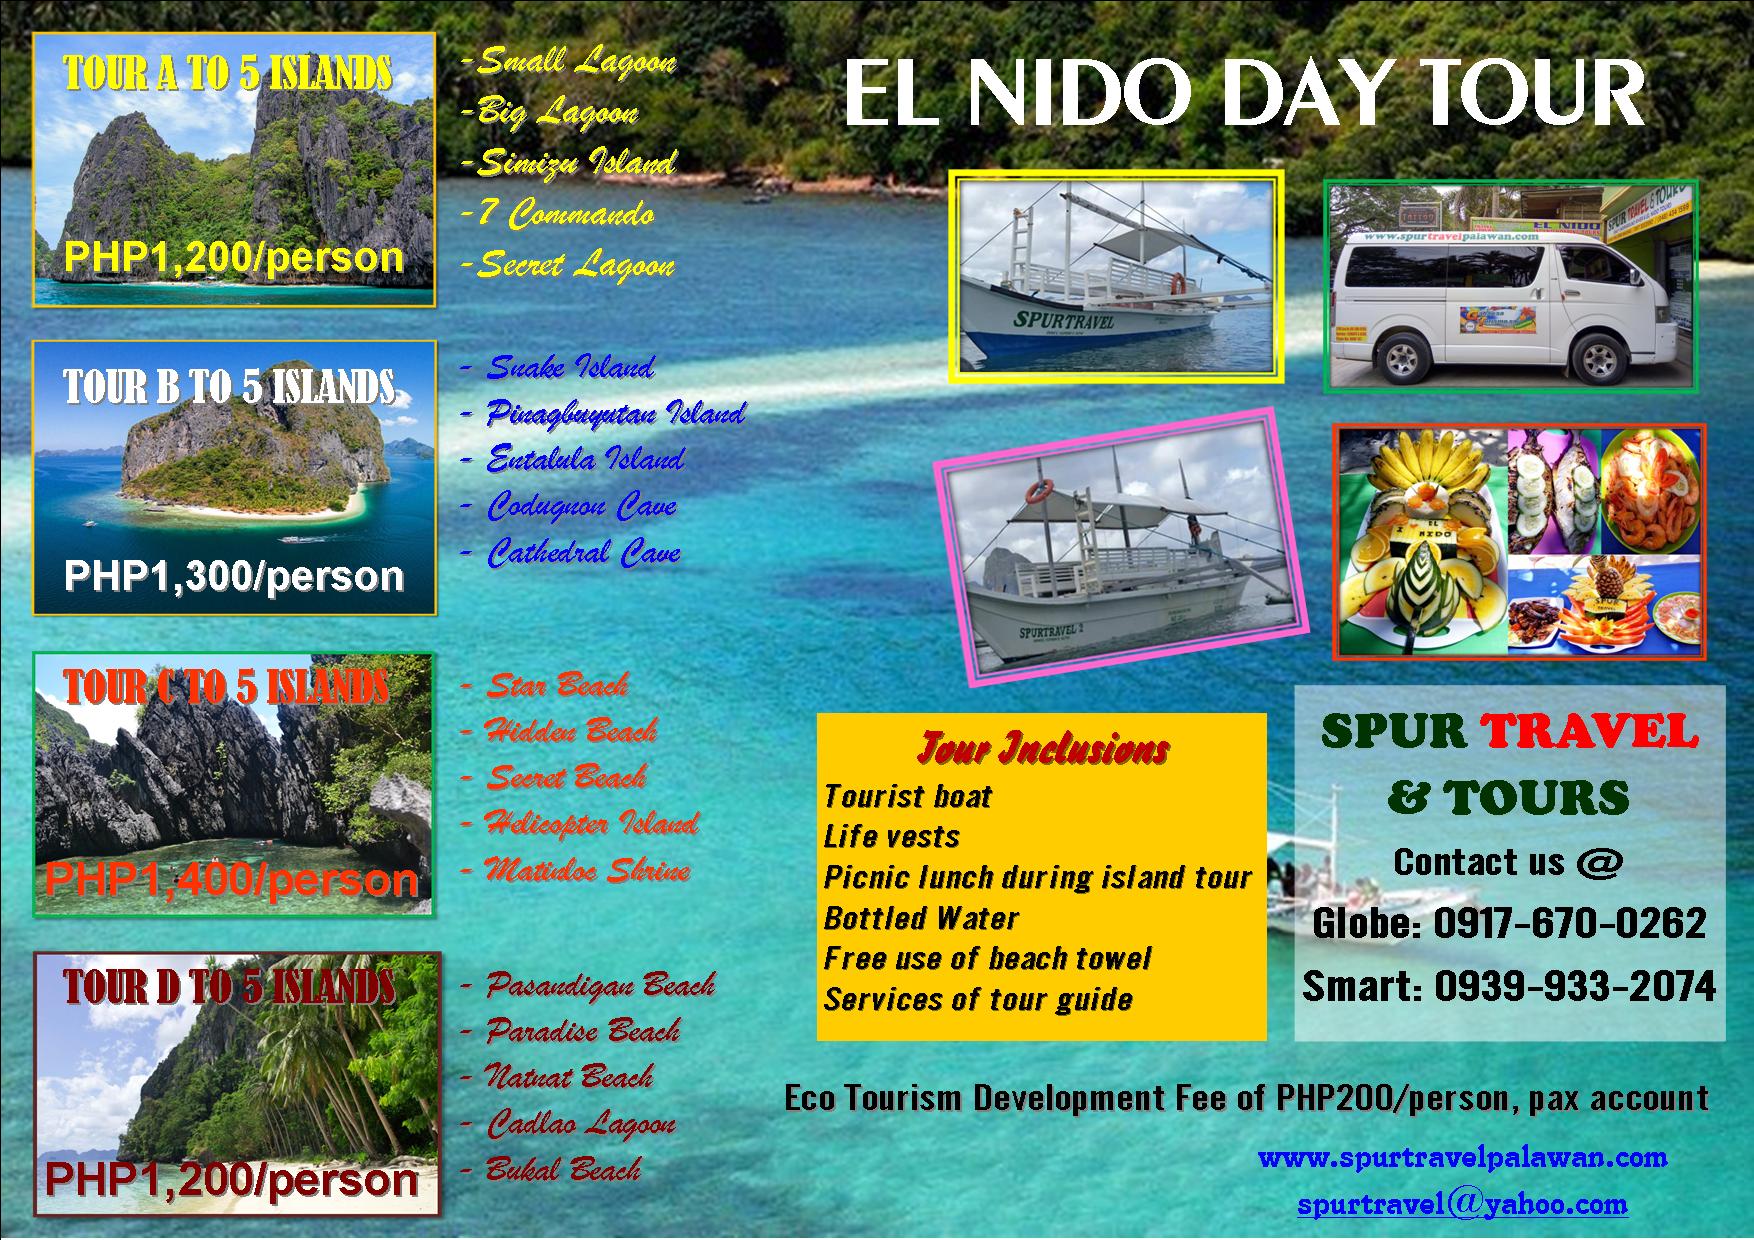 El Nido Day Tour only